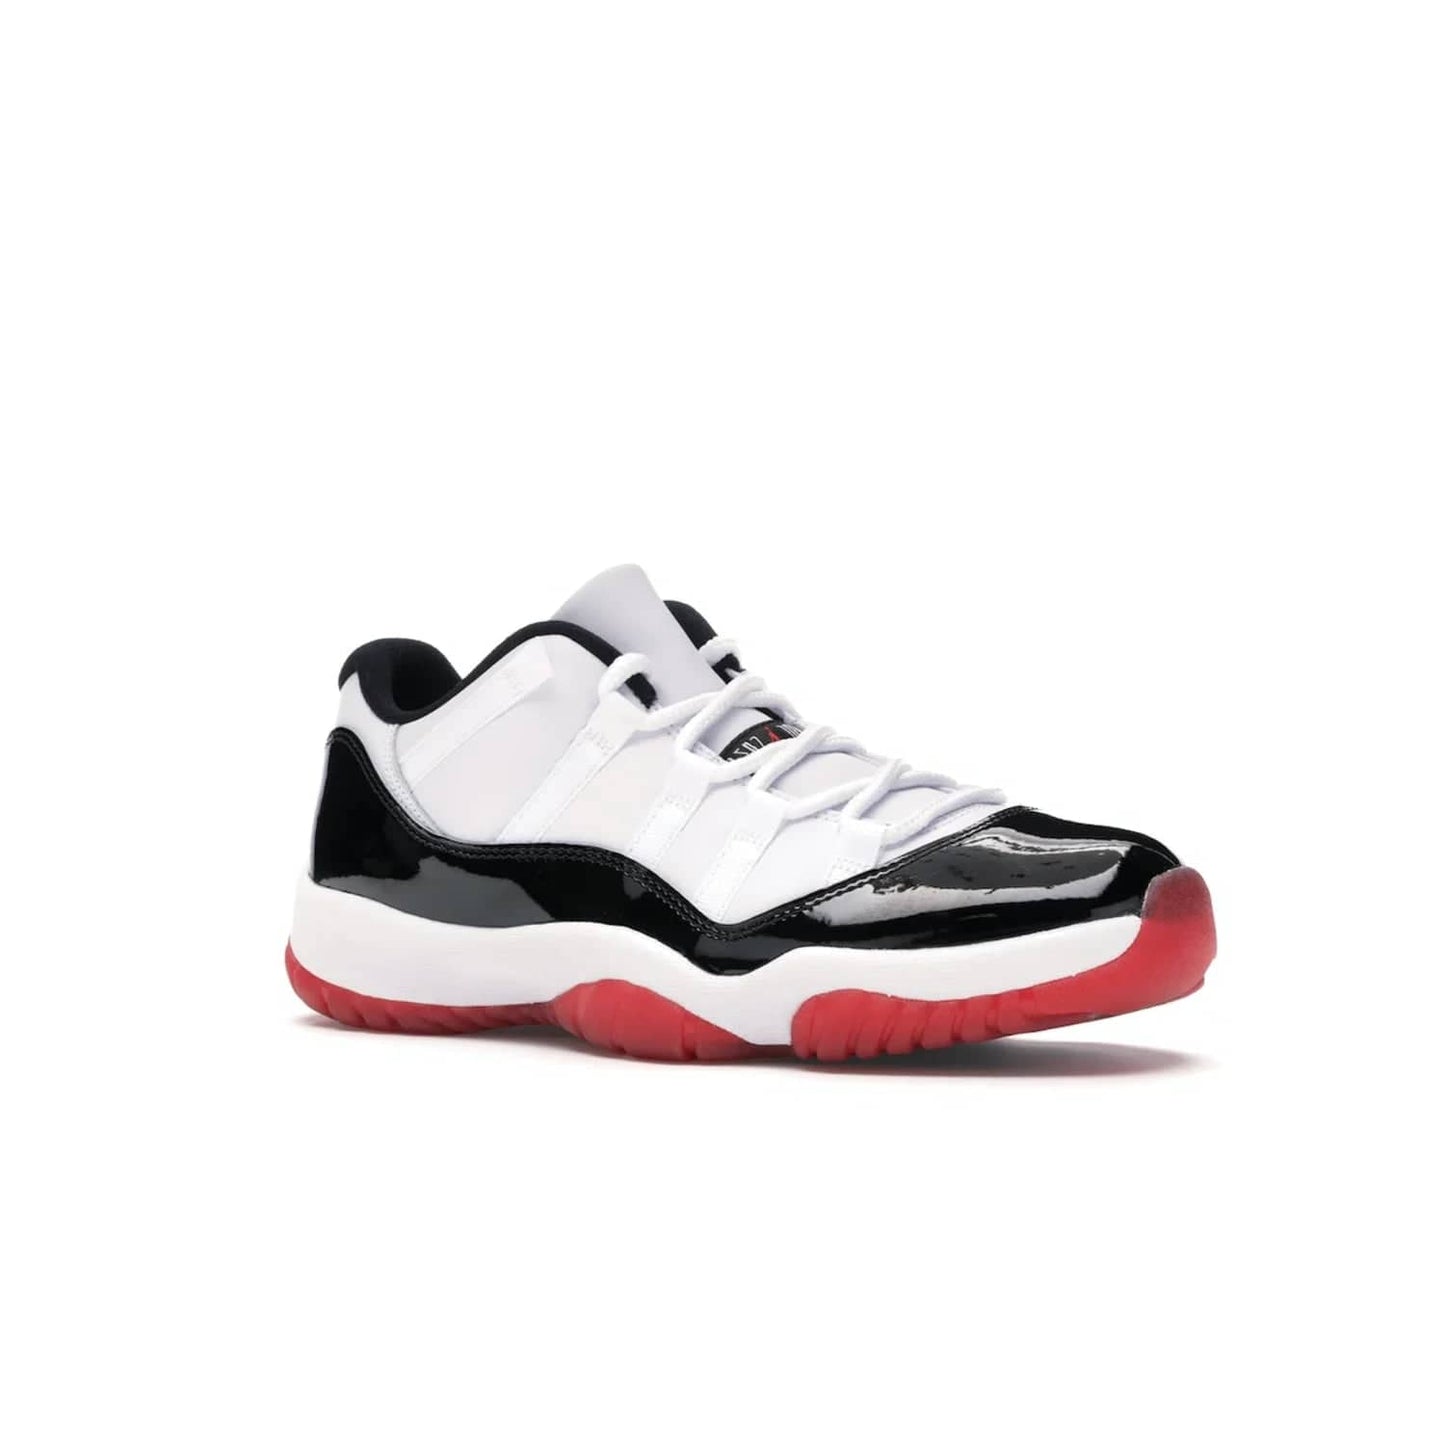 Jordan 11 Retro Low Concord Bred - Image 4 - Only at www.BallersClubKickz.com - Grab the classic Jordan 11 look with the Jordan 11 Retro Low Concord Bred. With white and black elements and the iconic red outsole of the Jordan 11 Bred, you won't miss a beat. Released in June 2020, the perfect complement to any outfit.